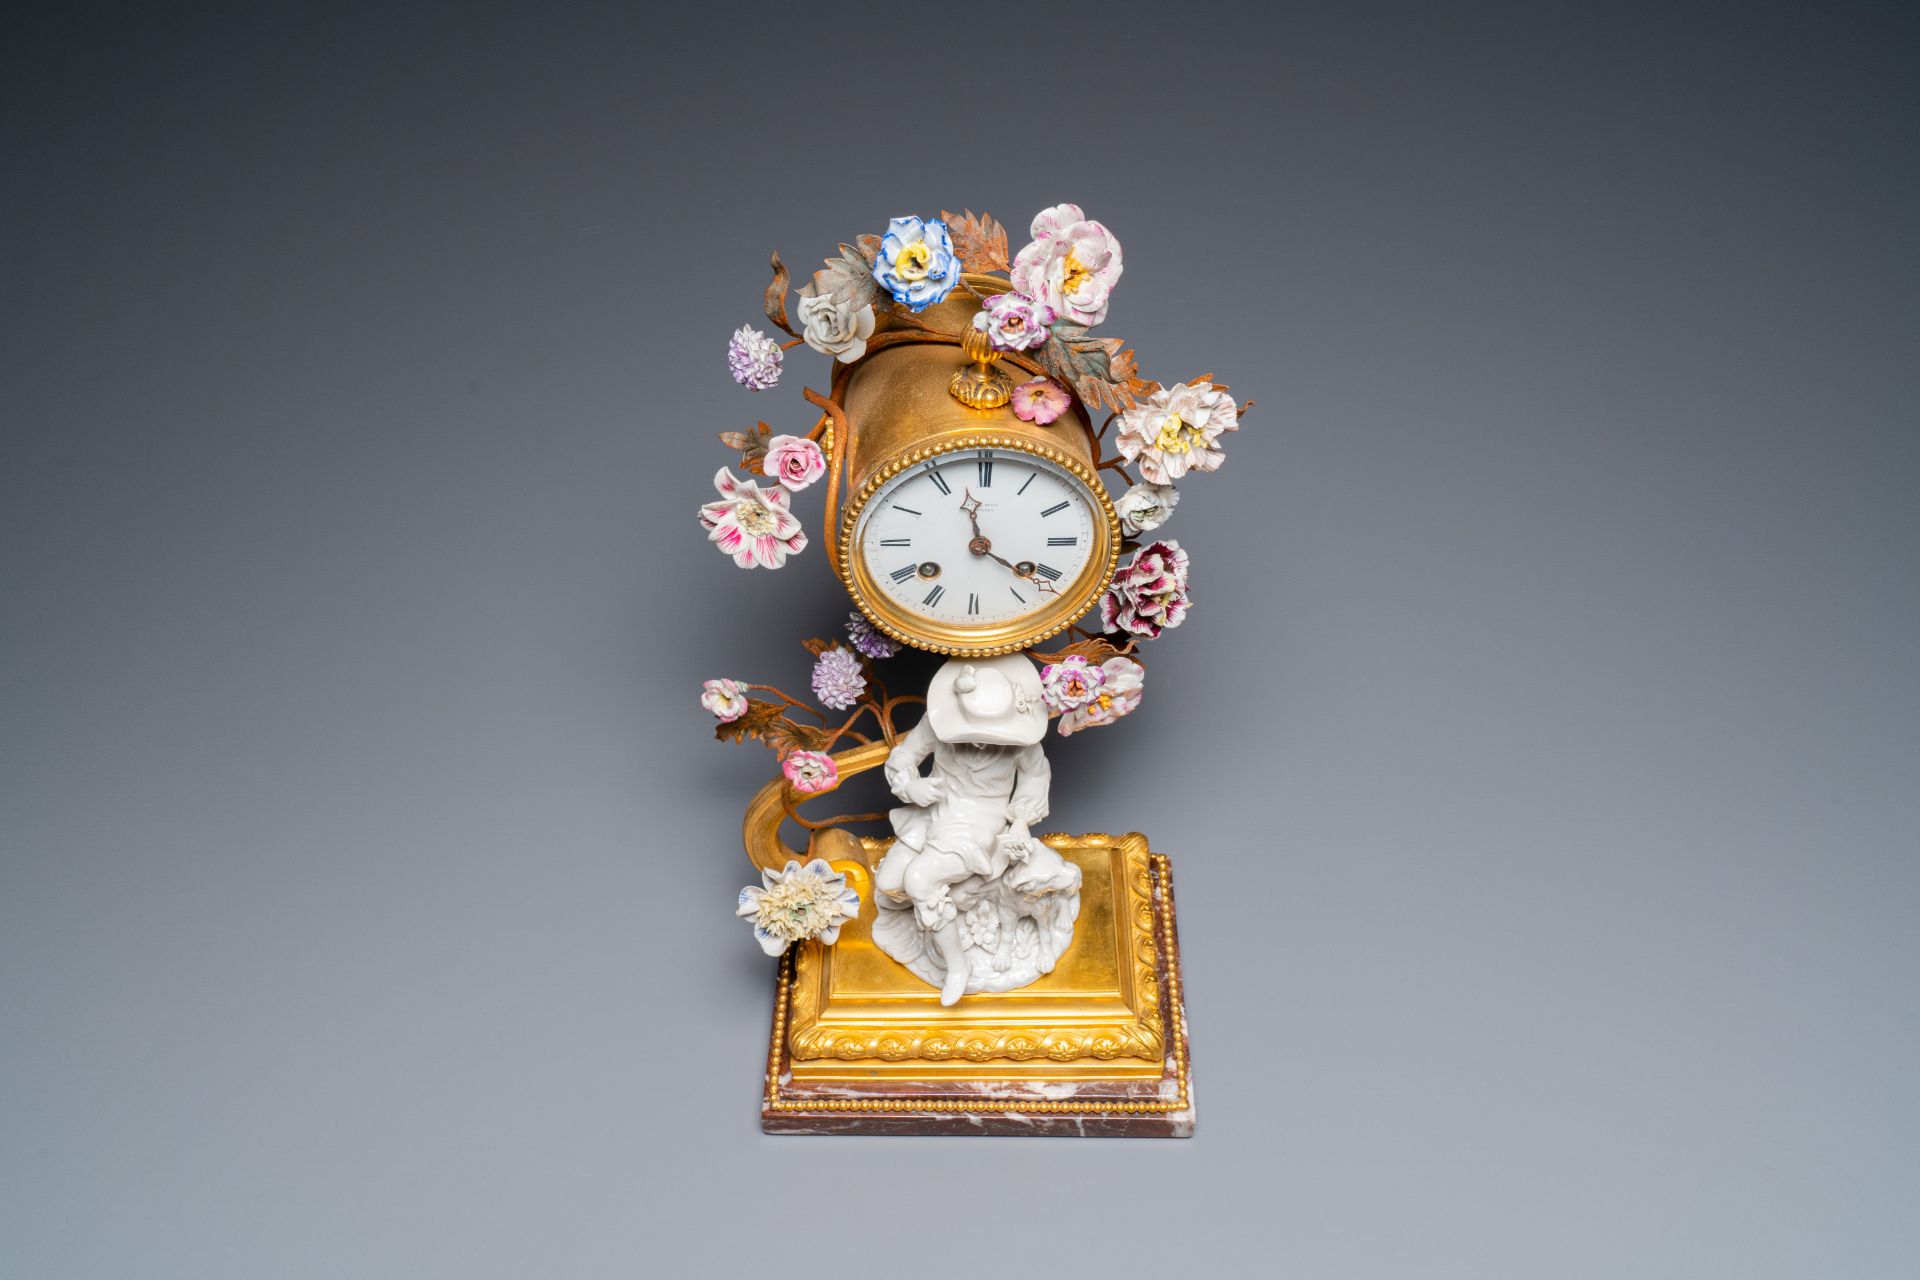 A French ormolu-mounted porcelain mantel clock, 18/19th C. - Image 19 of 28